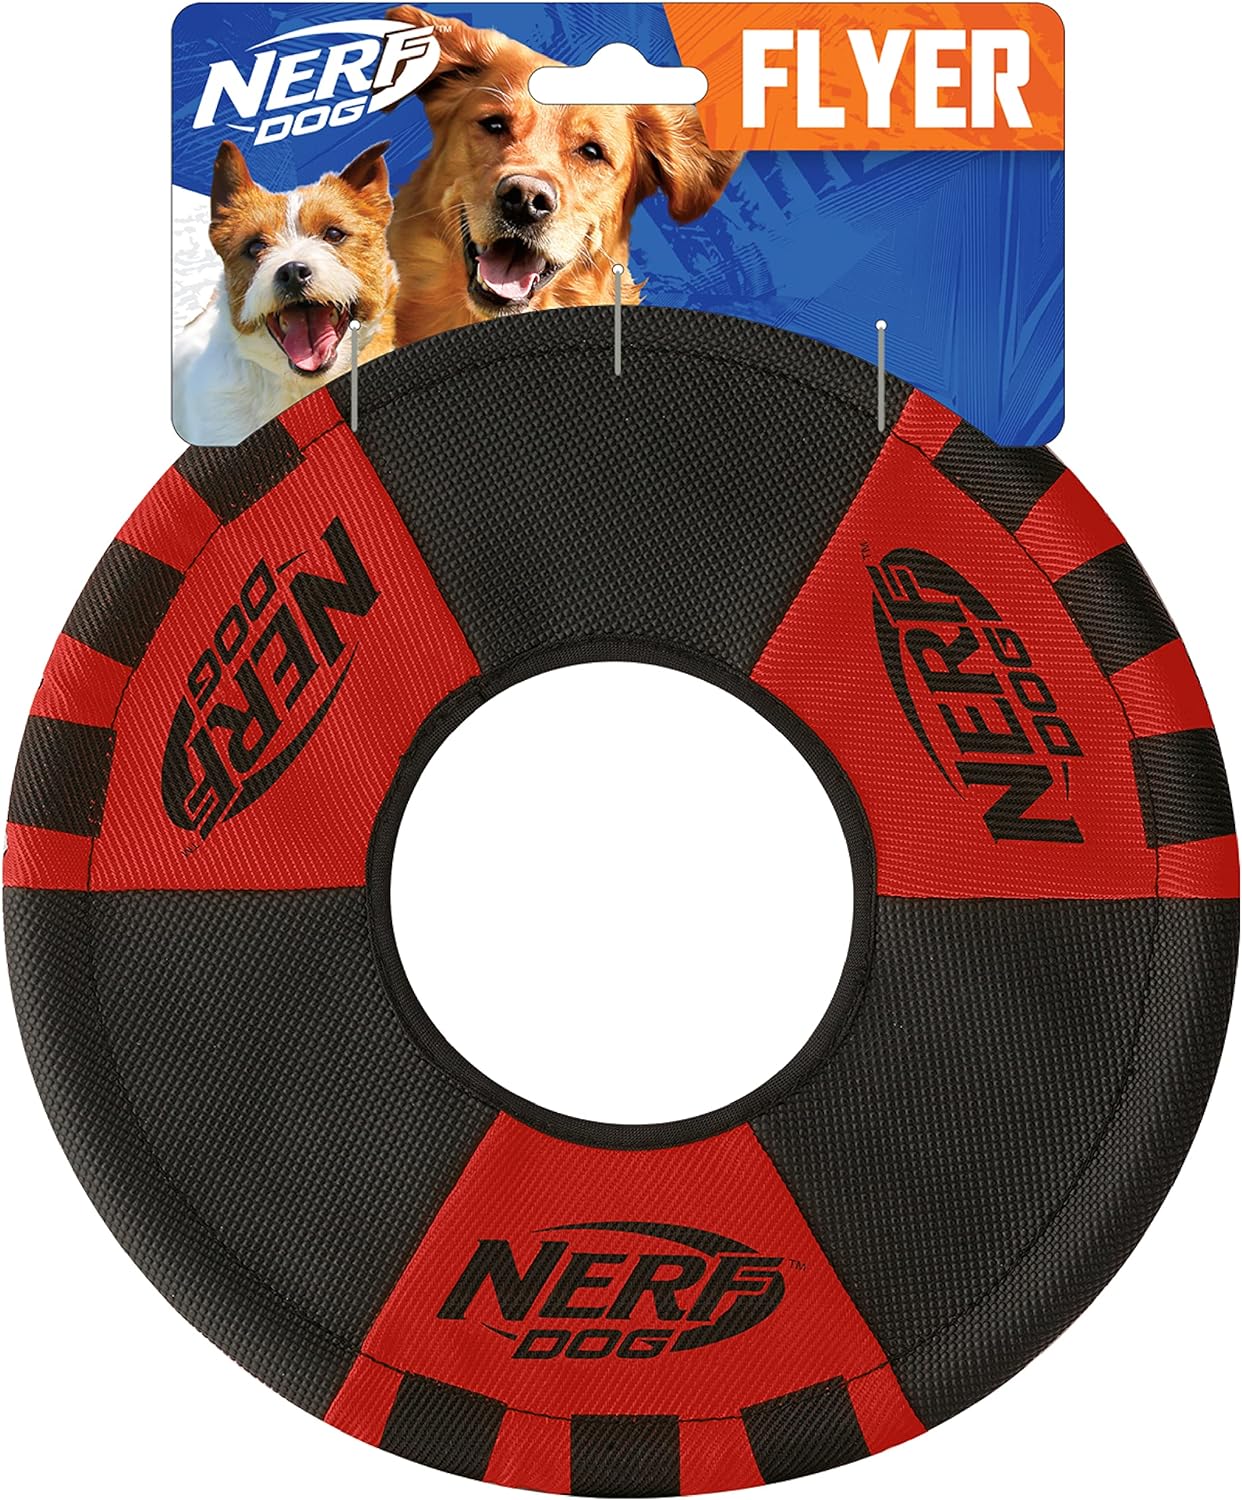 My dog loves her new Frisbee. Soft enough to catch in her mouth, light weight, but strong enough to hold up to rough playing. The fabric is very durable! Flies great! Good size for my lab and cocker spaniel.